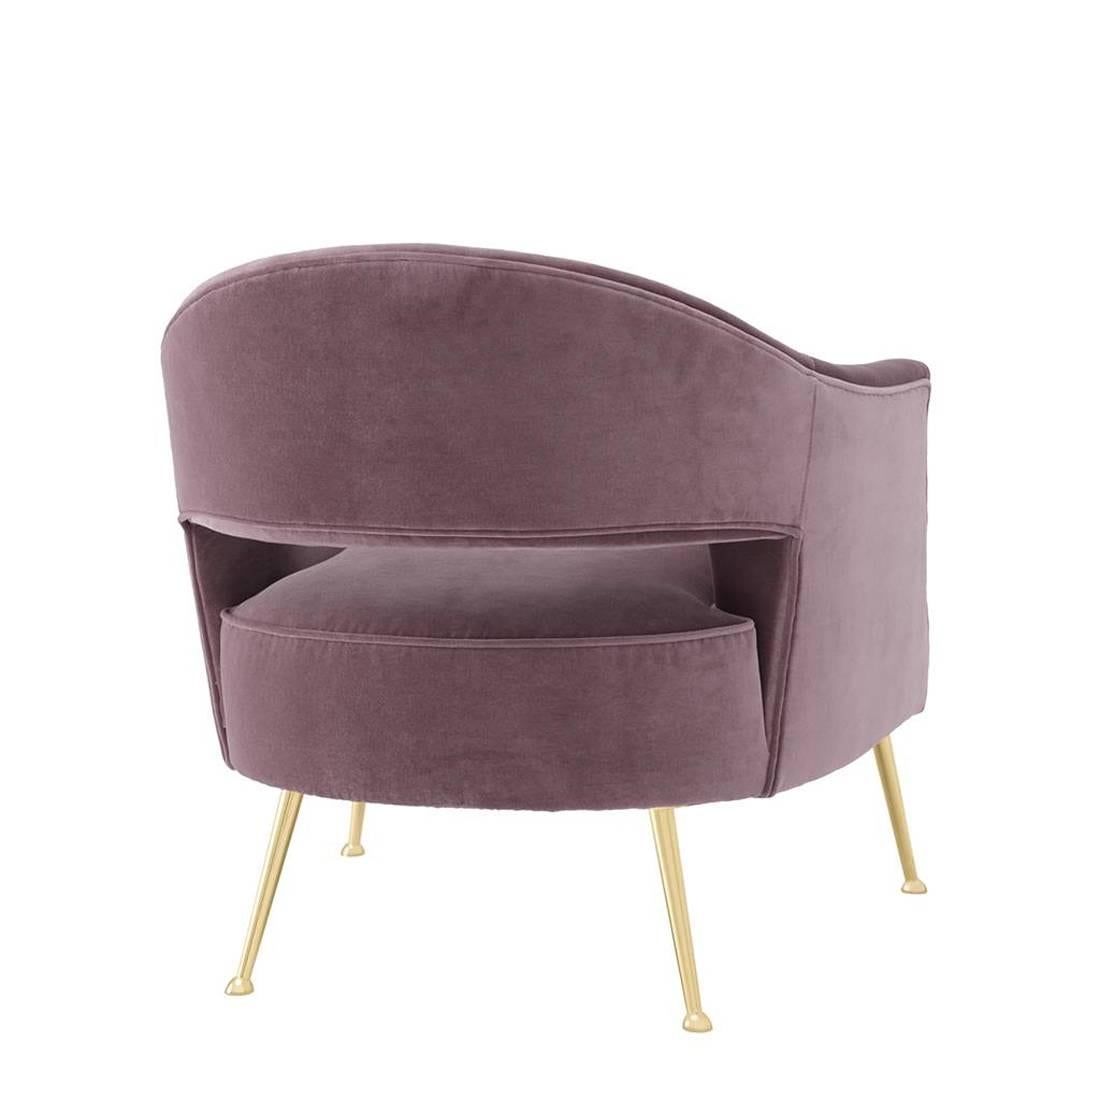 Chinese Parma Armchair in Purple Velvet Fabric